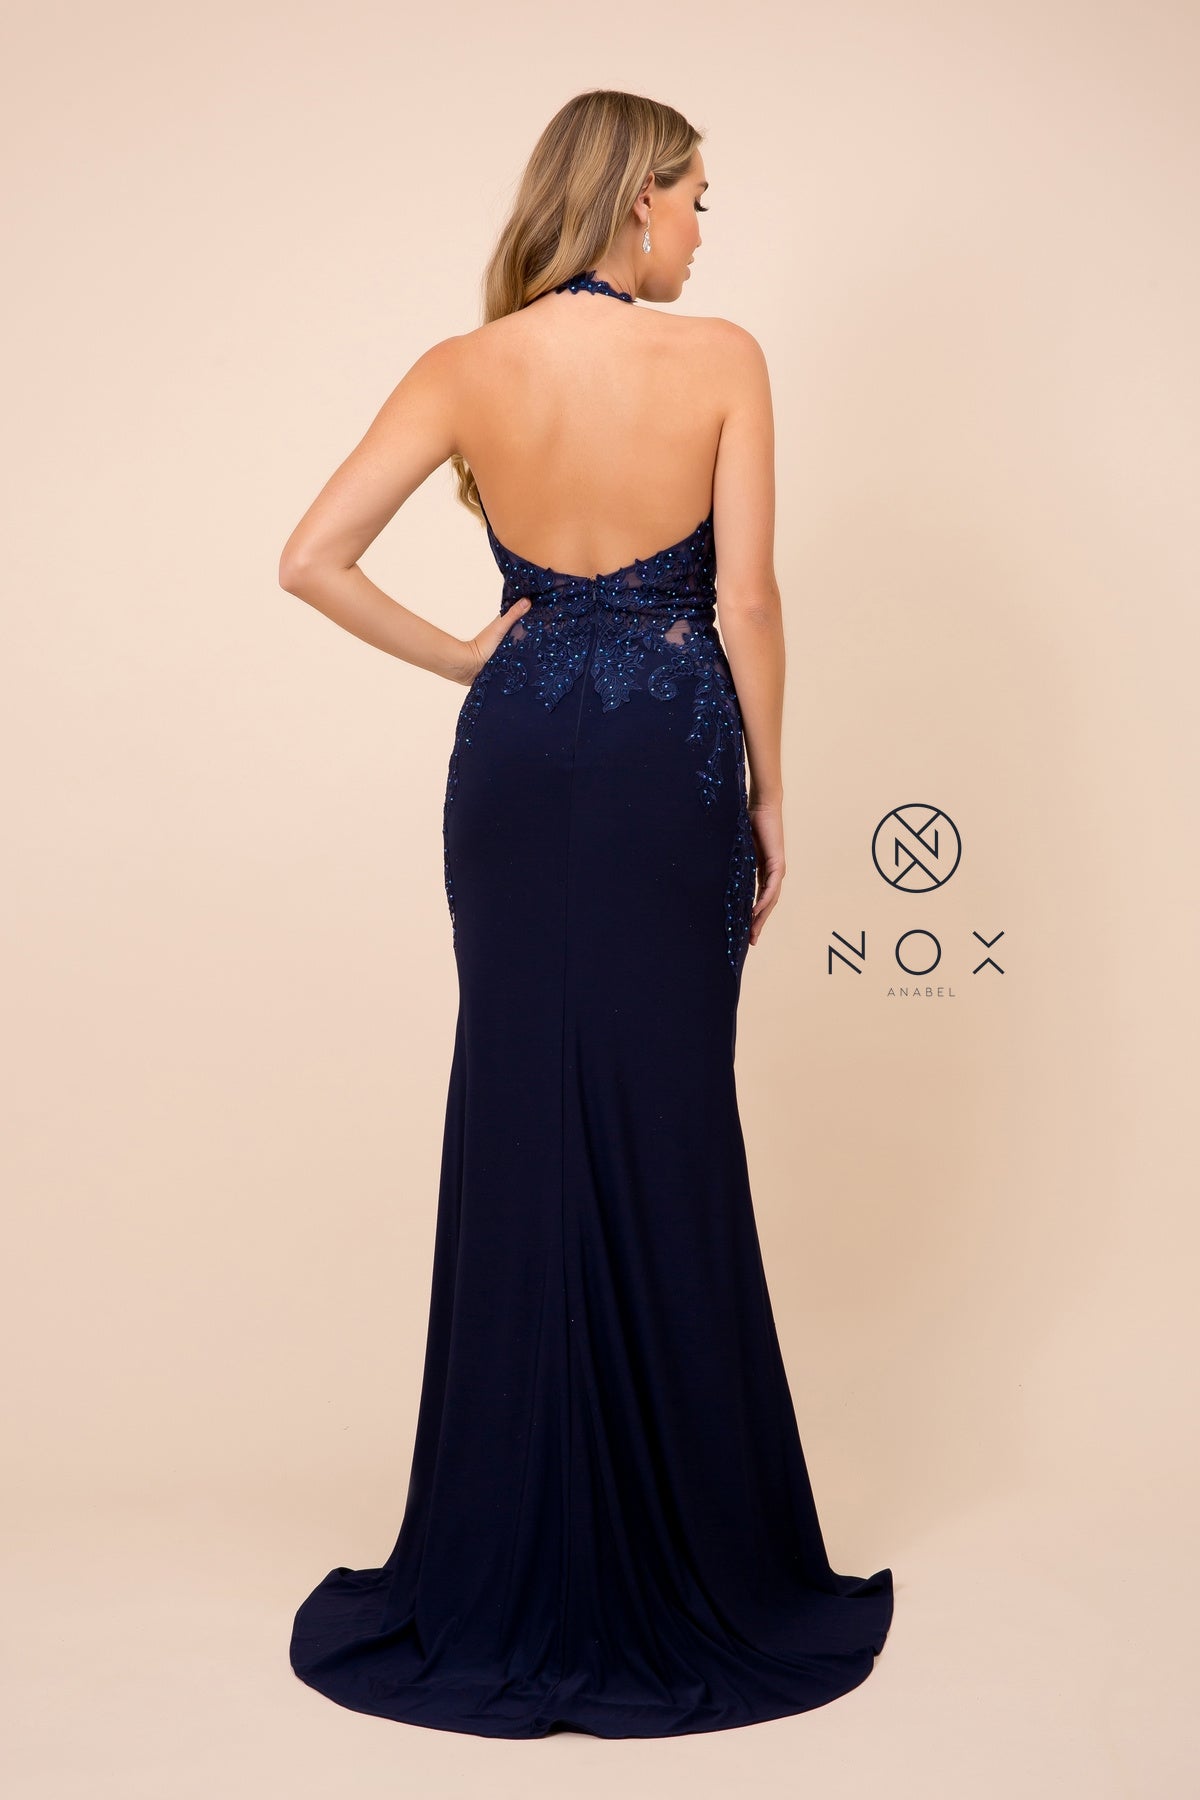 MyFashion.com - LONG HALTER JERSEY SPECIAL OCCASION DRESS. (A175) - Nox Anabel promdress eveningdress fashion partydress weddingdress 
 gown homecoming promgown weddinggown 